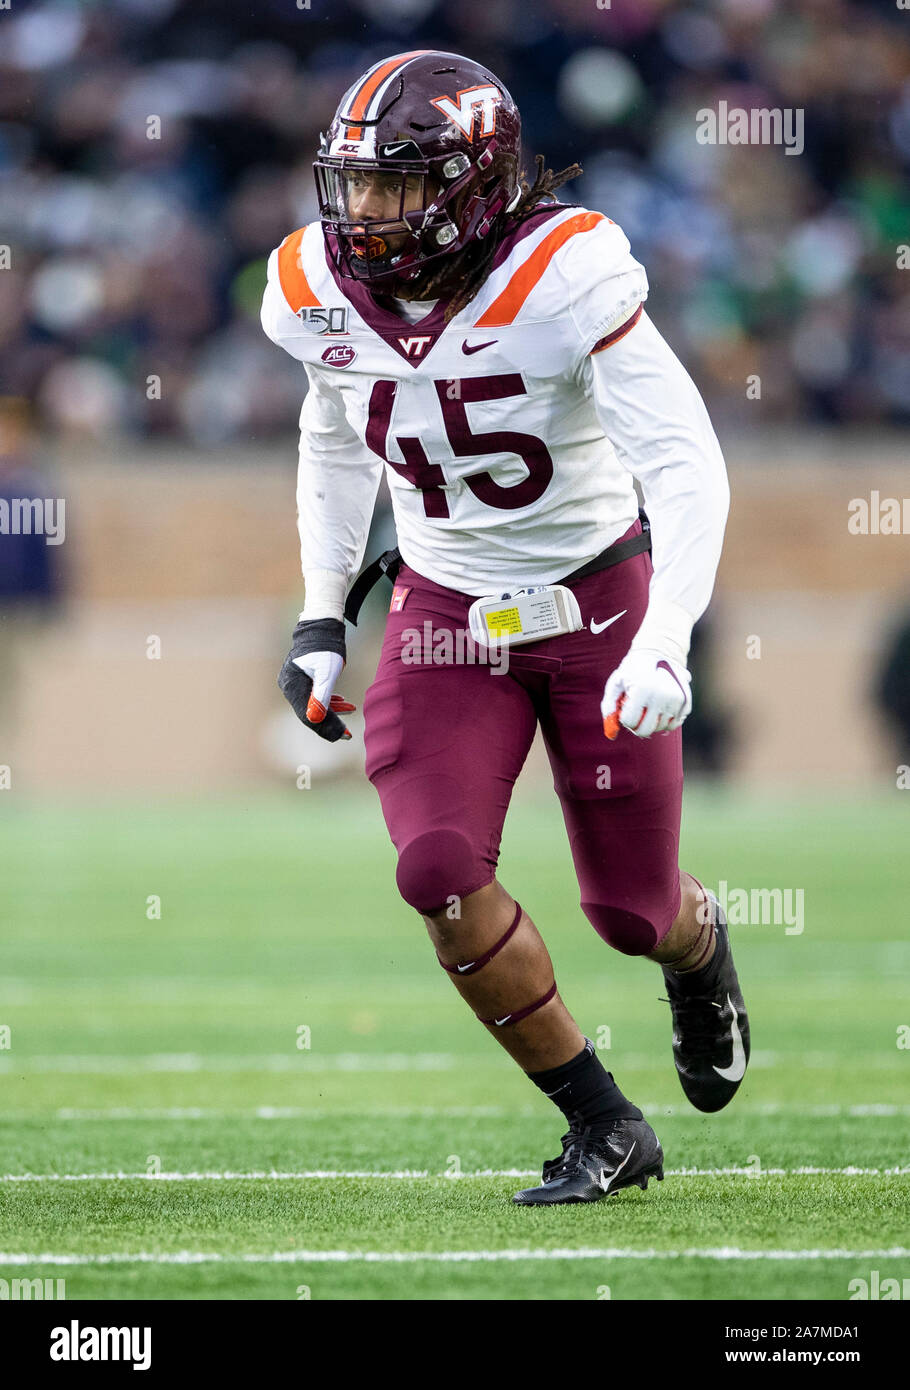 November 02, 2019: Virginia Tech defensive lineman TyJuan Garbutt (45)  during NCAA football game action between the Virginia Tech Hokies and the  Notre Dame Fighting Irish at Notre Dame Stadium in South